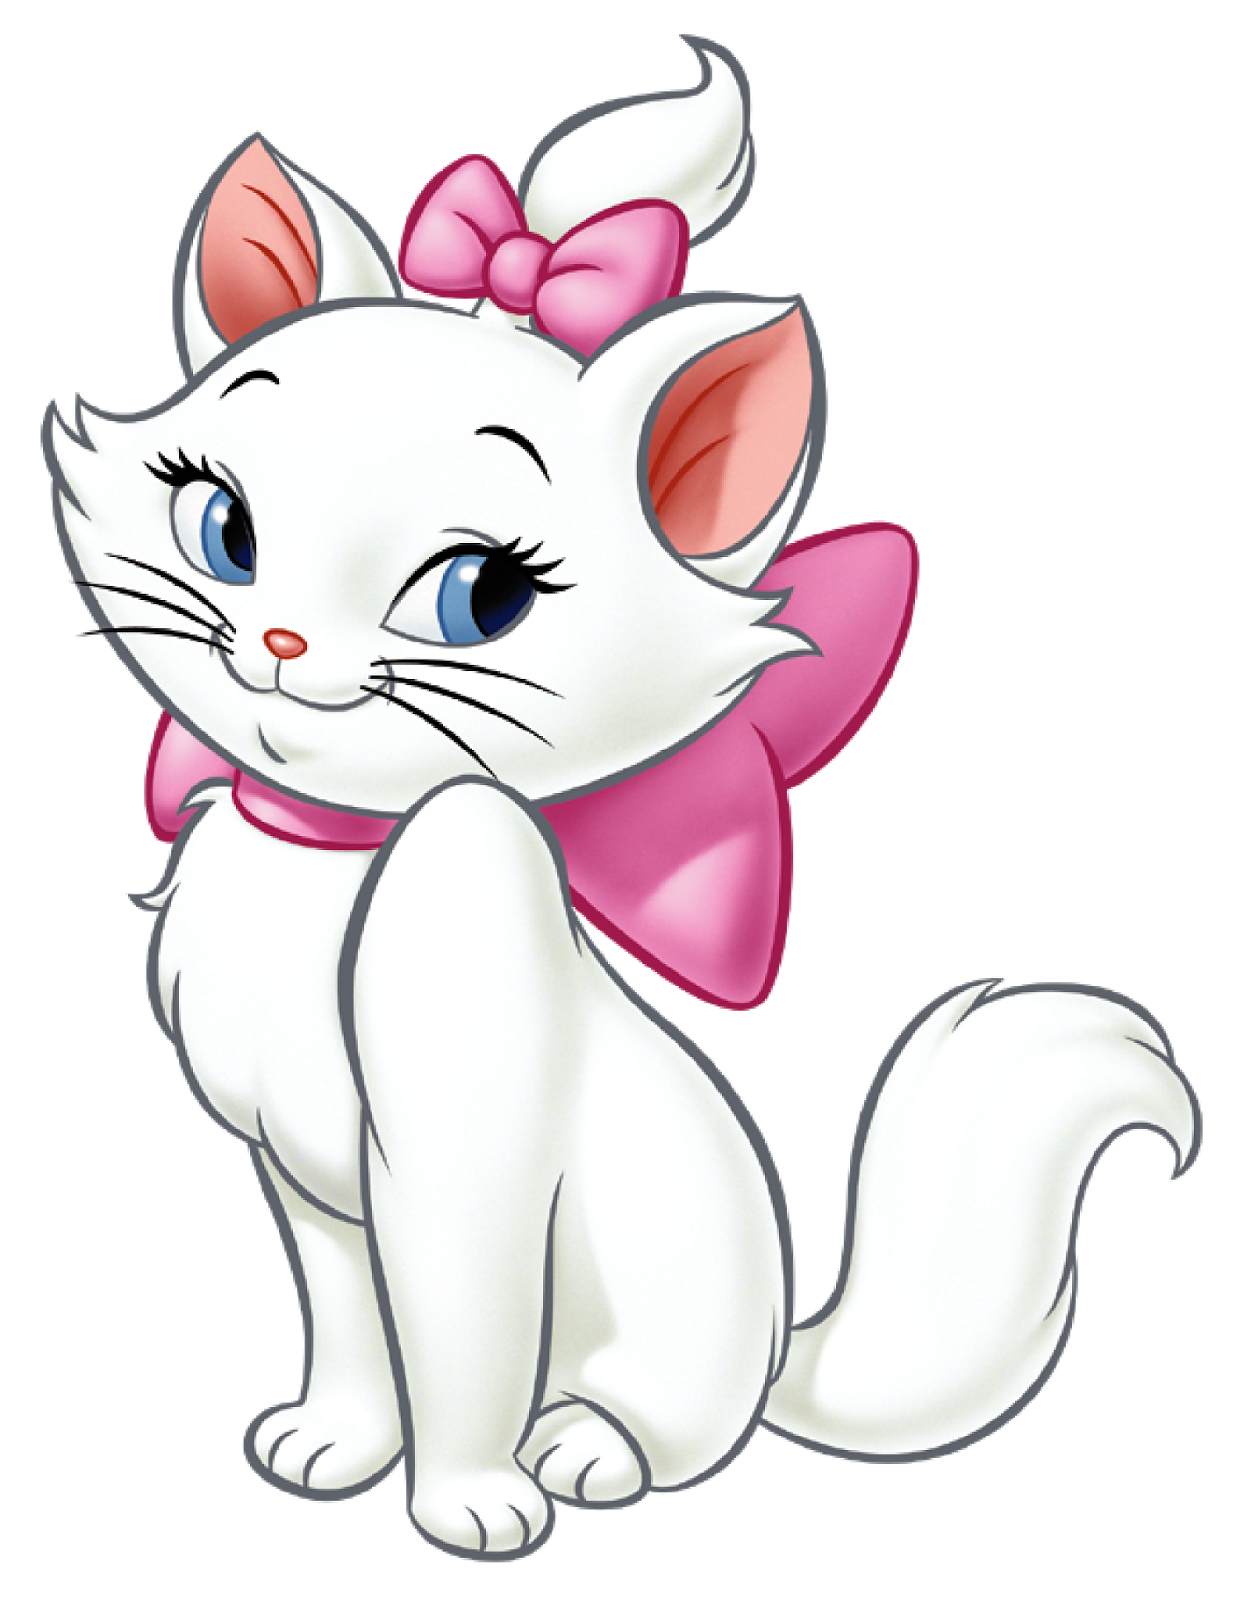 Kittens clipart marie, Picture #1486010 kittens clipart marie